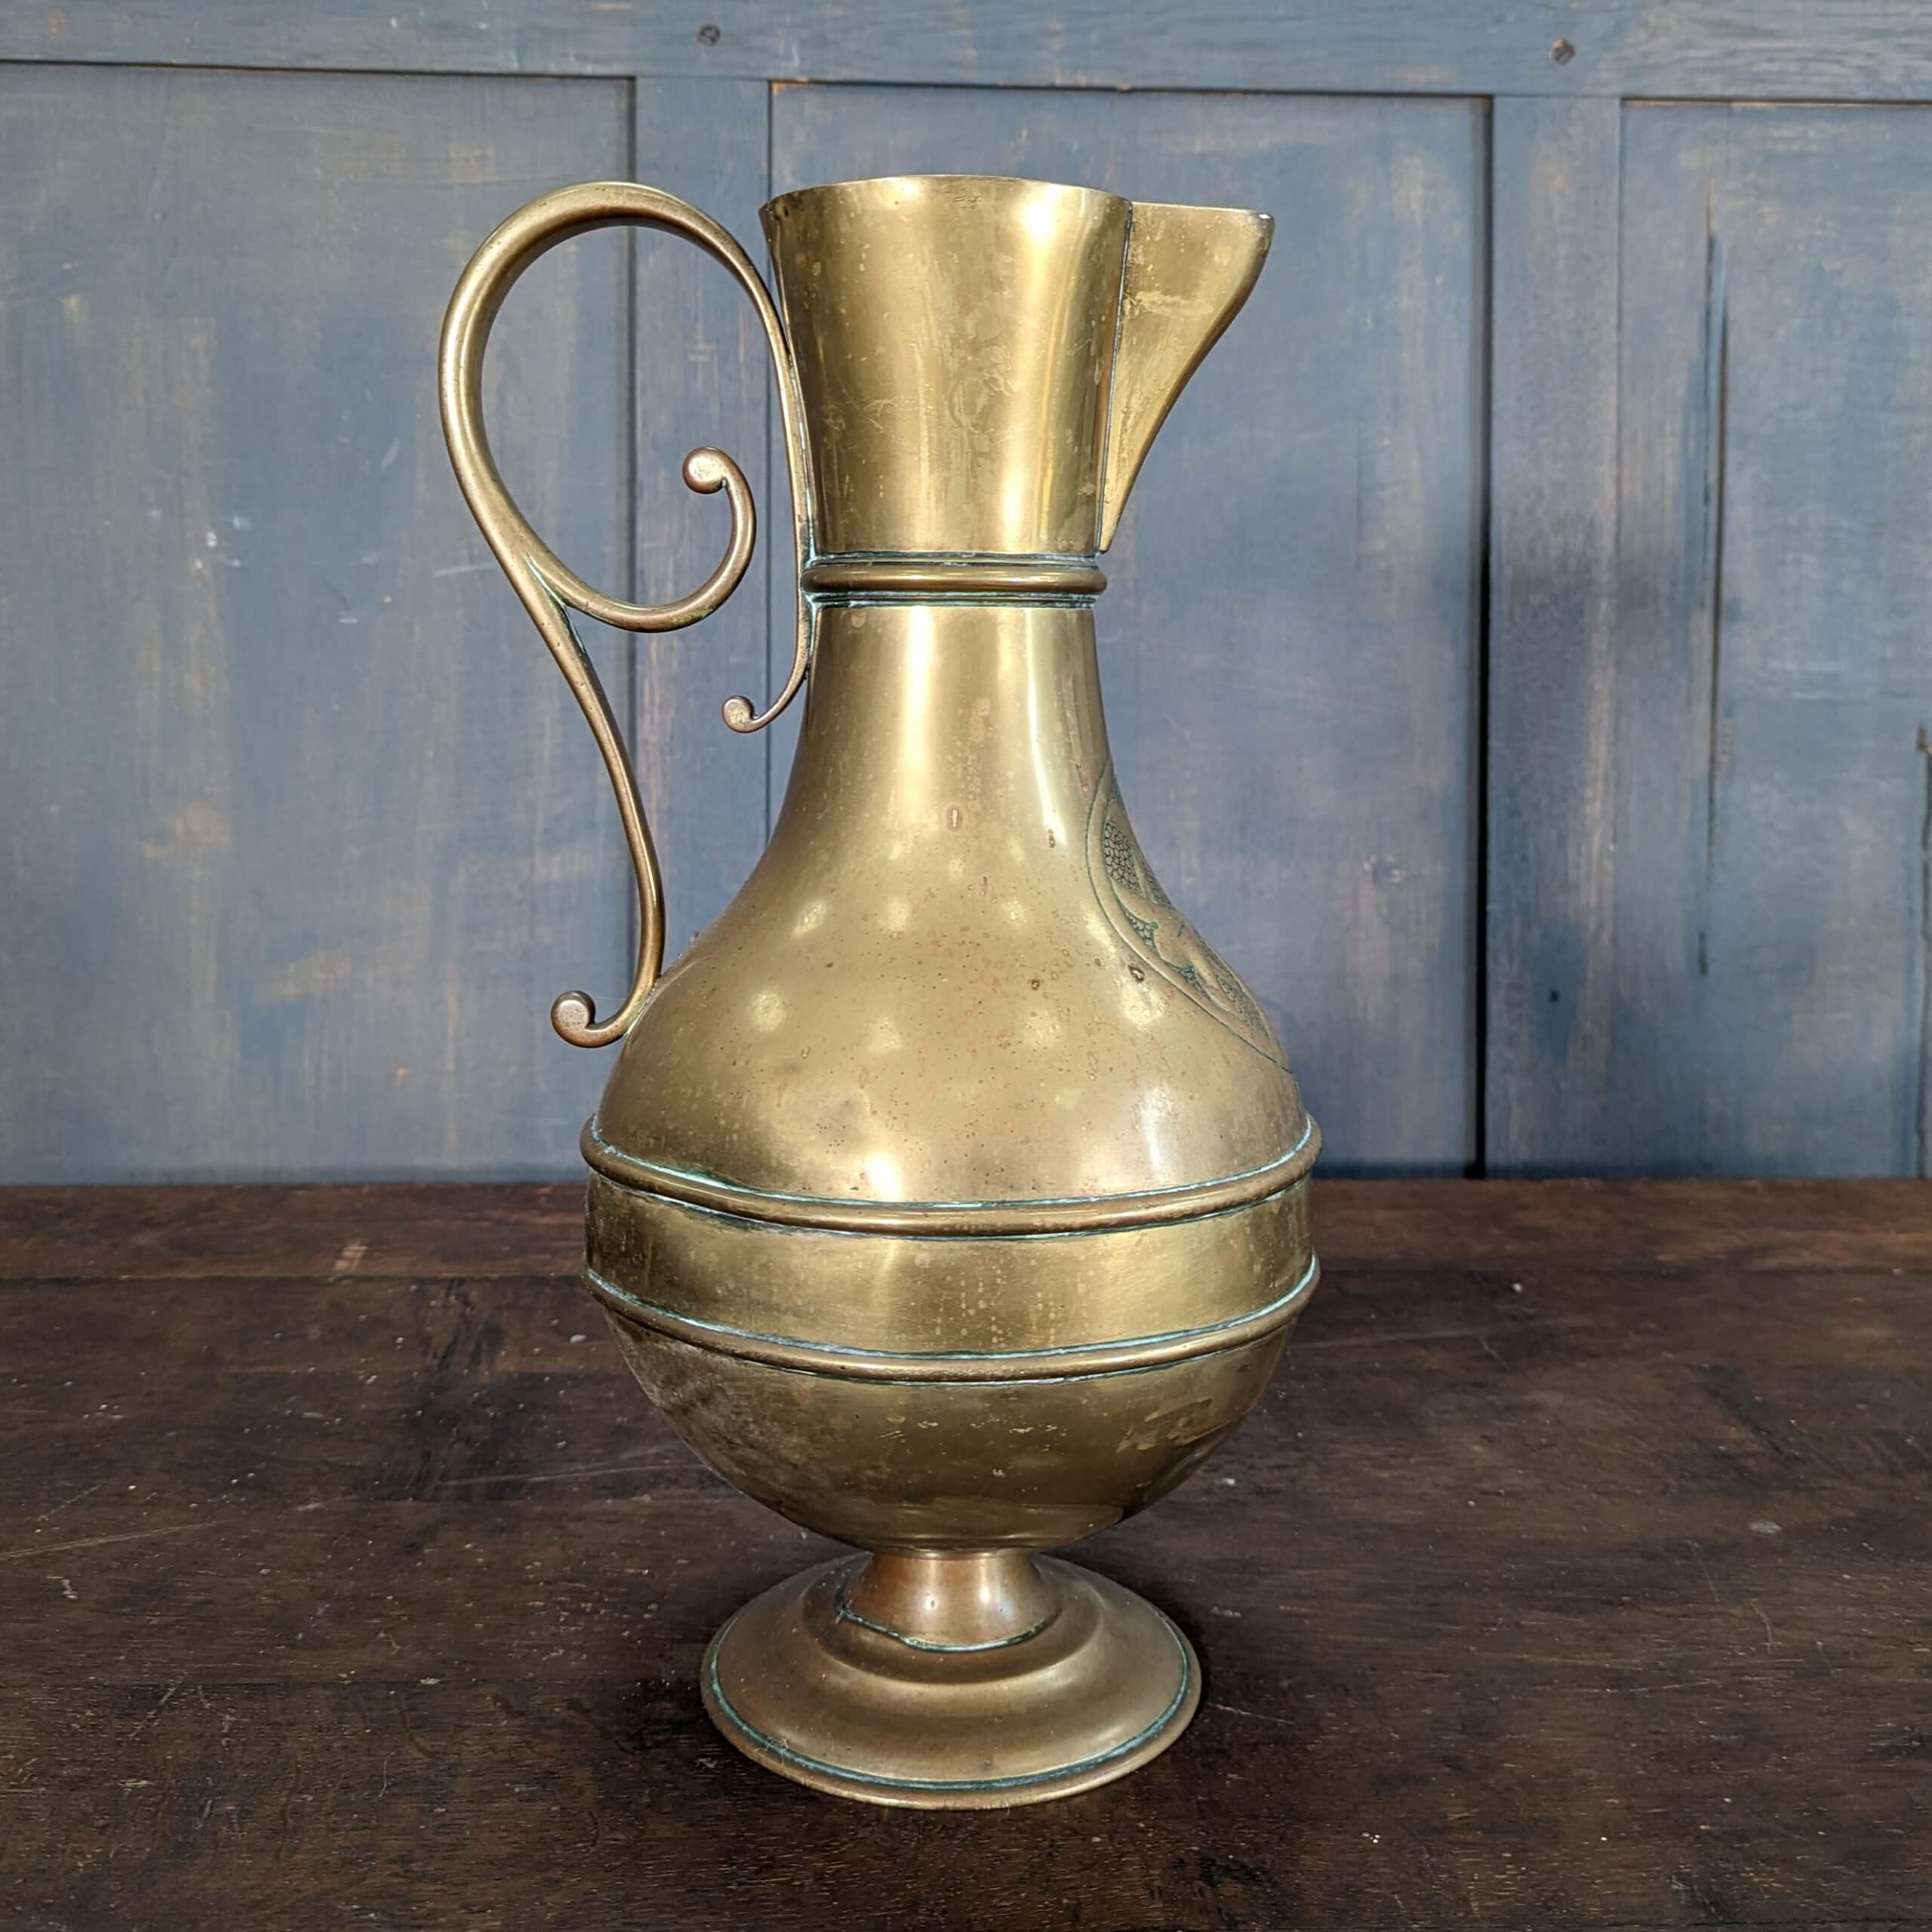 Antique Victorian Brass Church Baptismal Ewer Jug with Embossed Cross  (SOLD) - Antique Church Furnishings